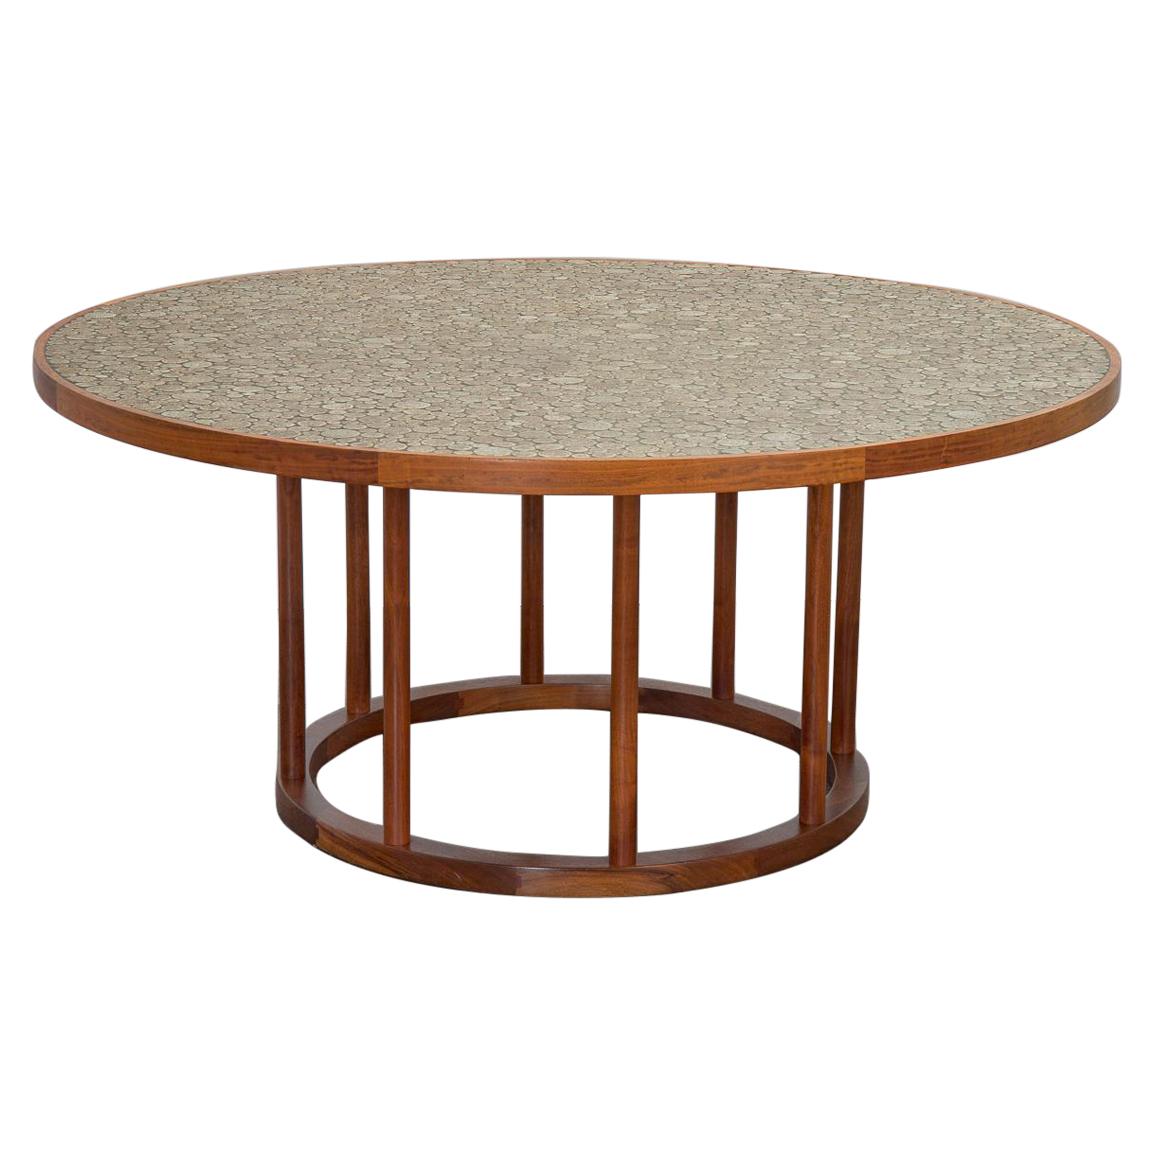 Monumental Coin Tile Dining Table